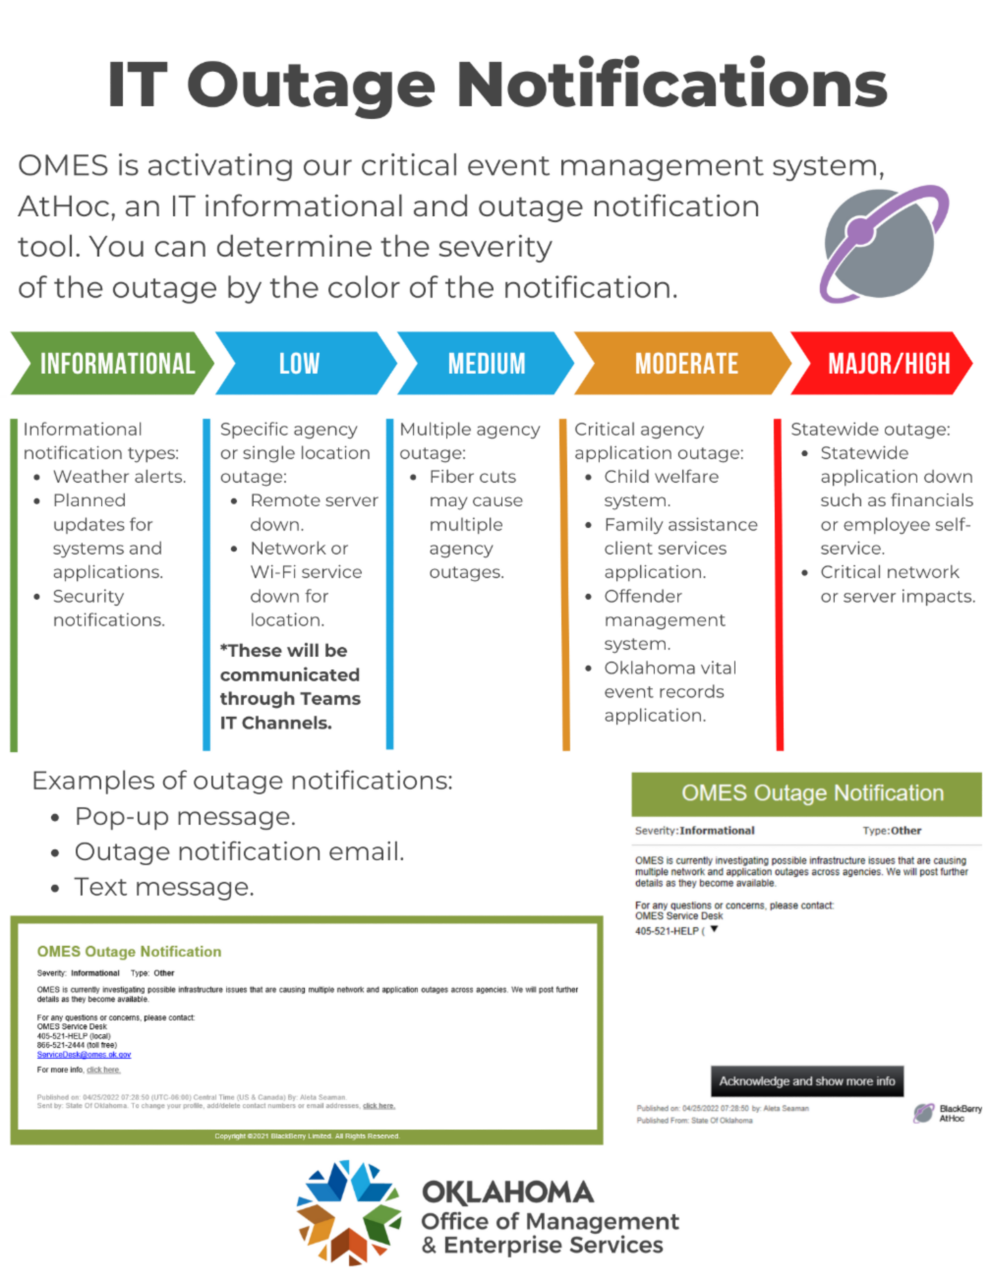 Information on the OMES IT critical event management system, AtHoc.